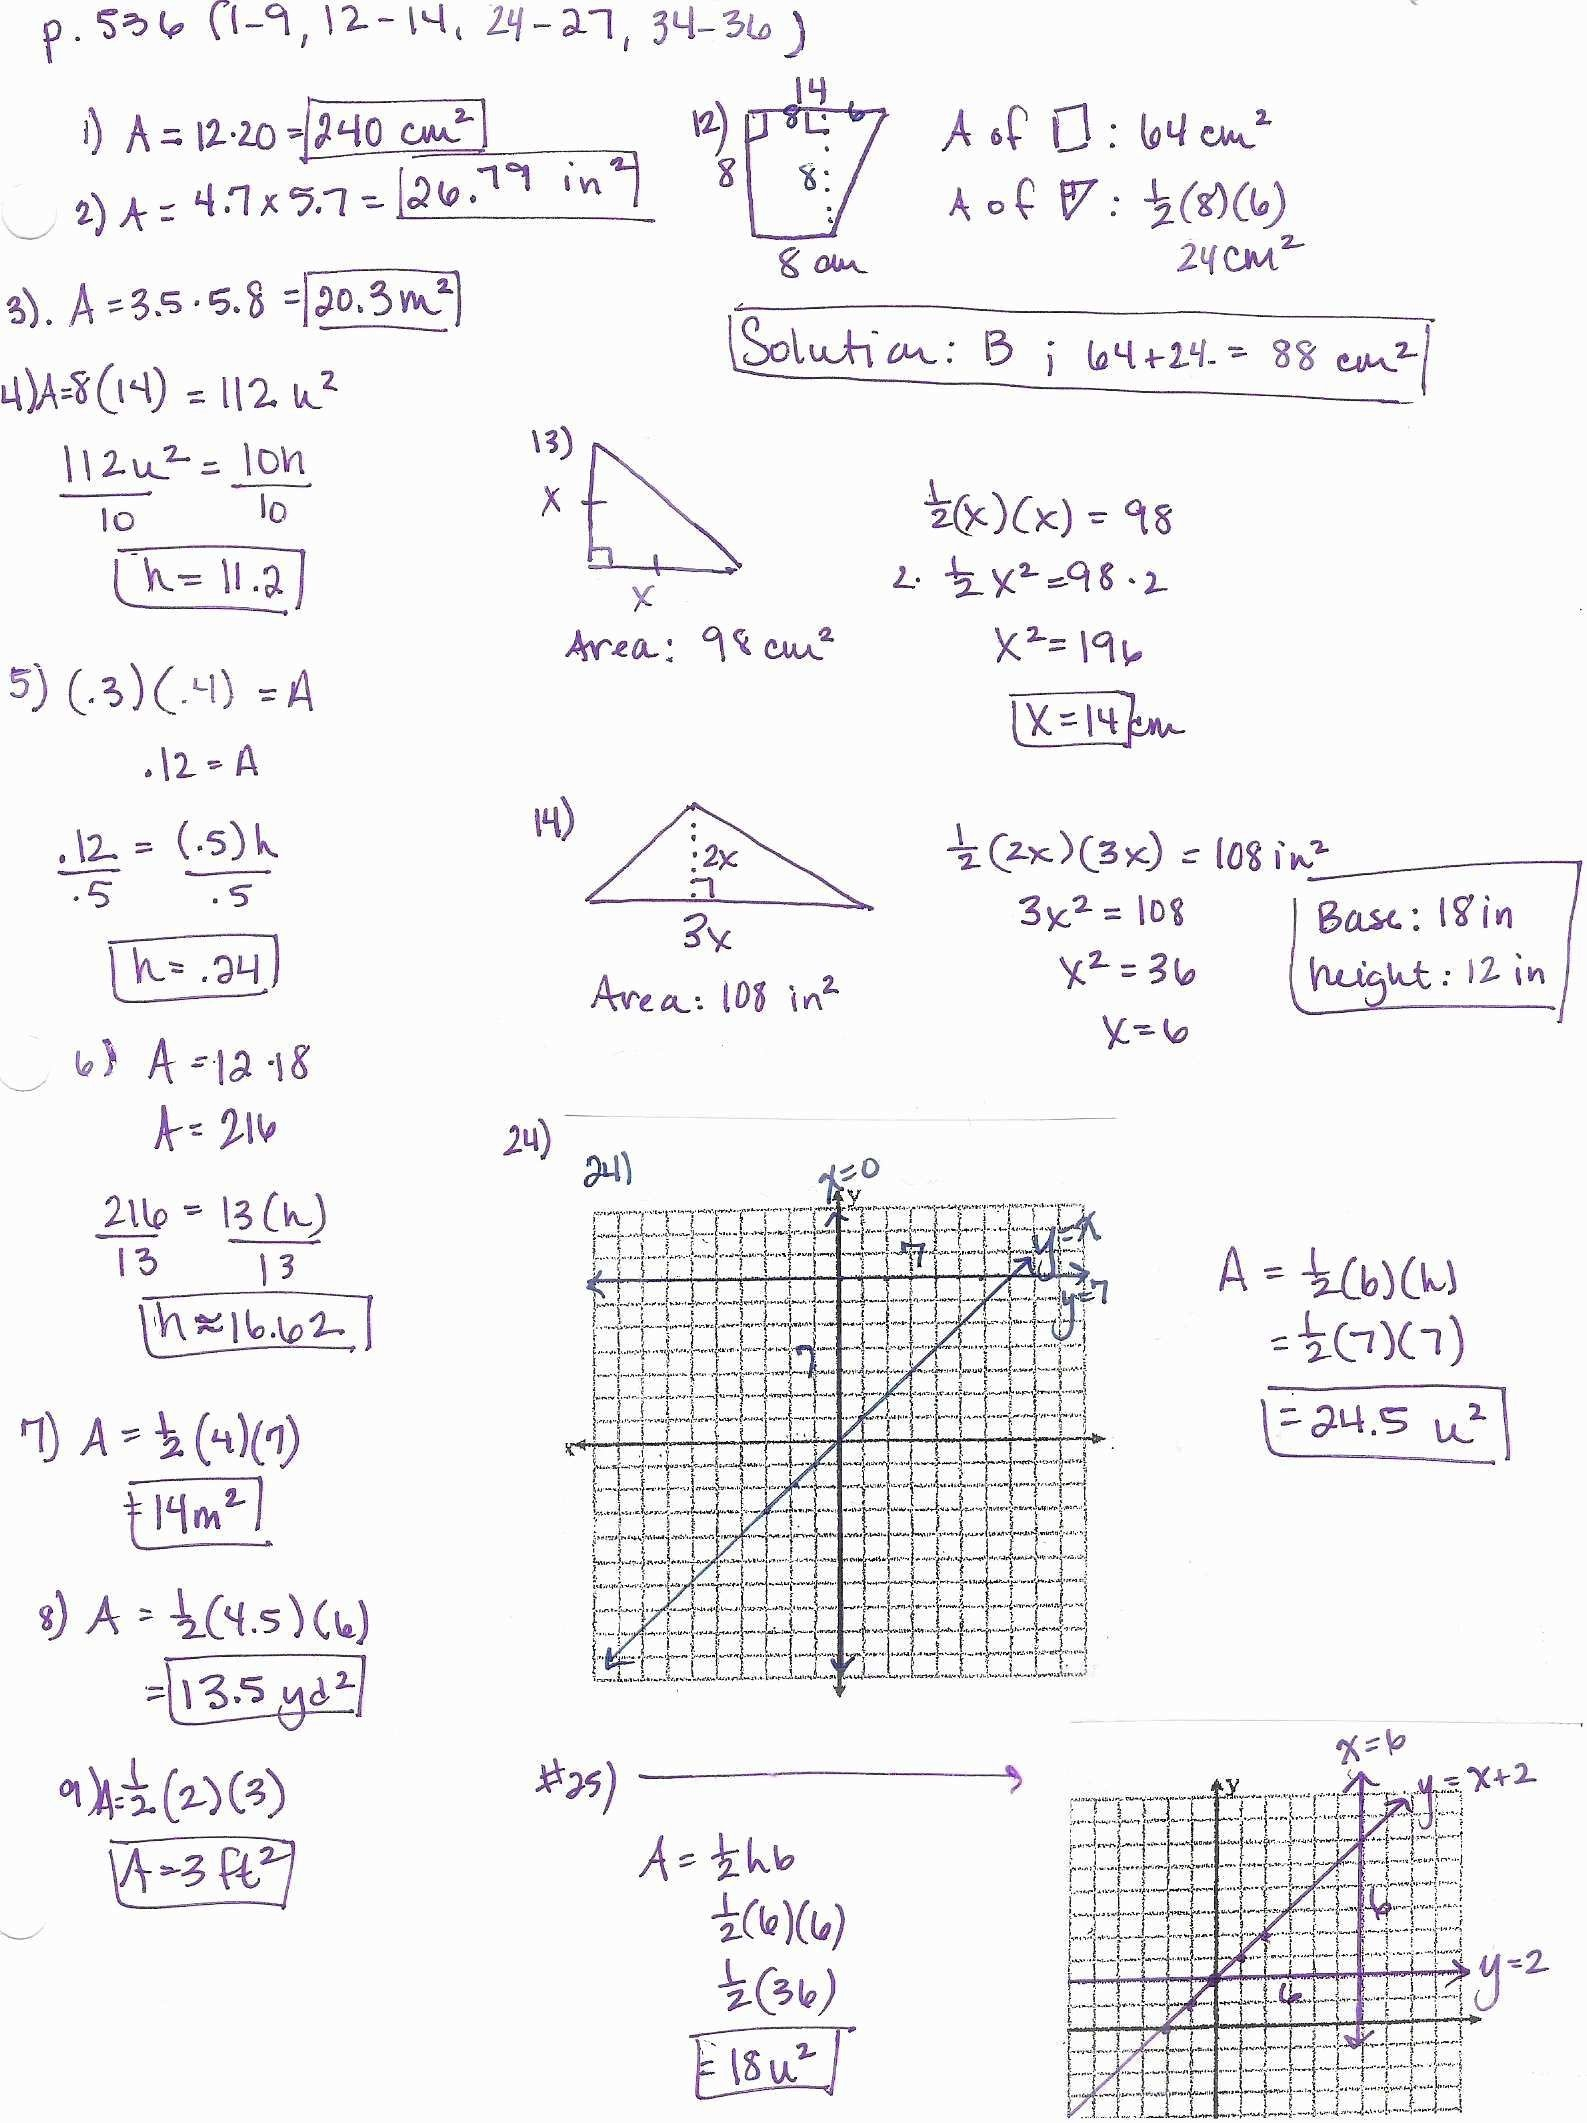 Triangle Sum And Exterior Angle Theorem Worksheet  Yooob Along With Worksheet Triangle Sum And Exterior Angle Theorem